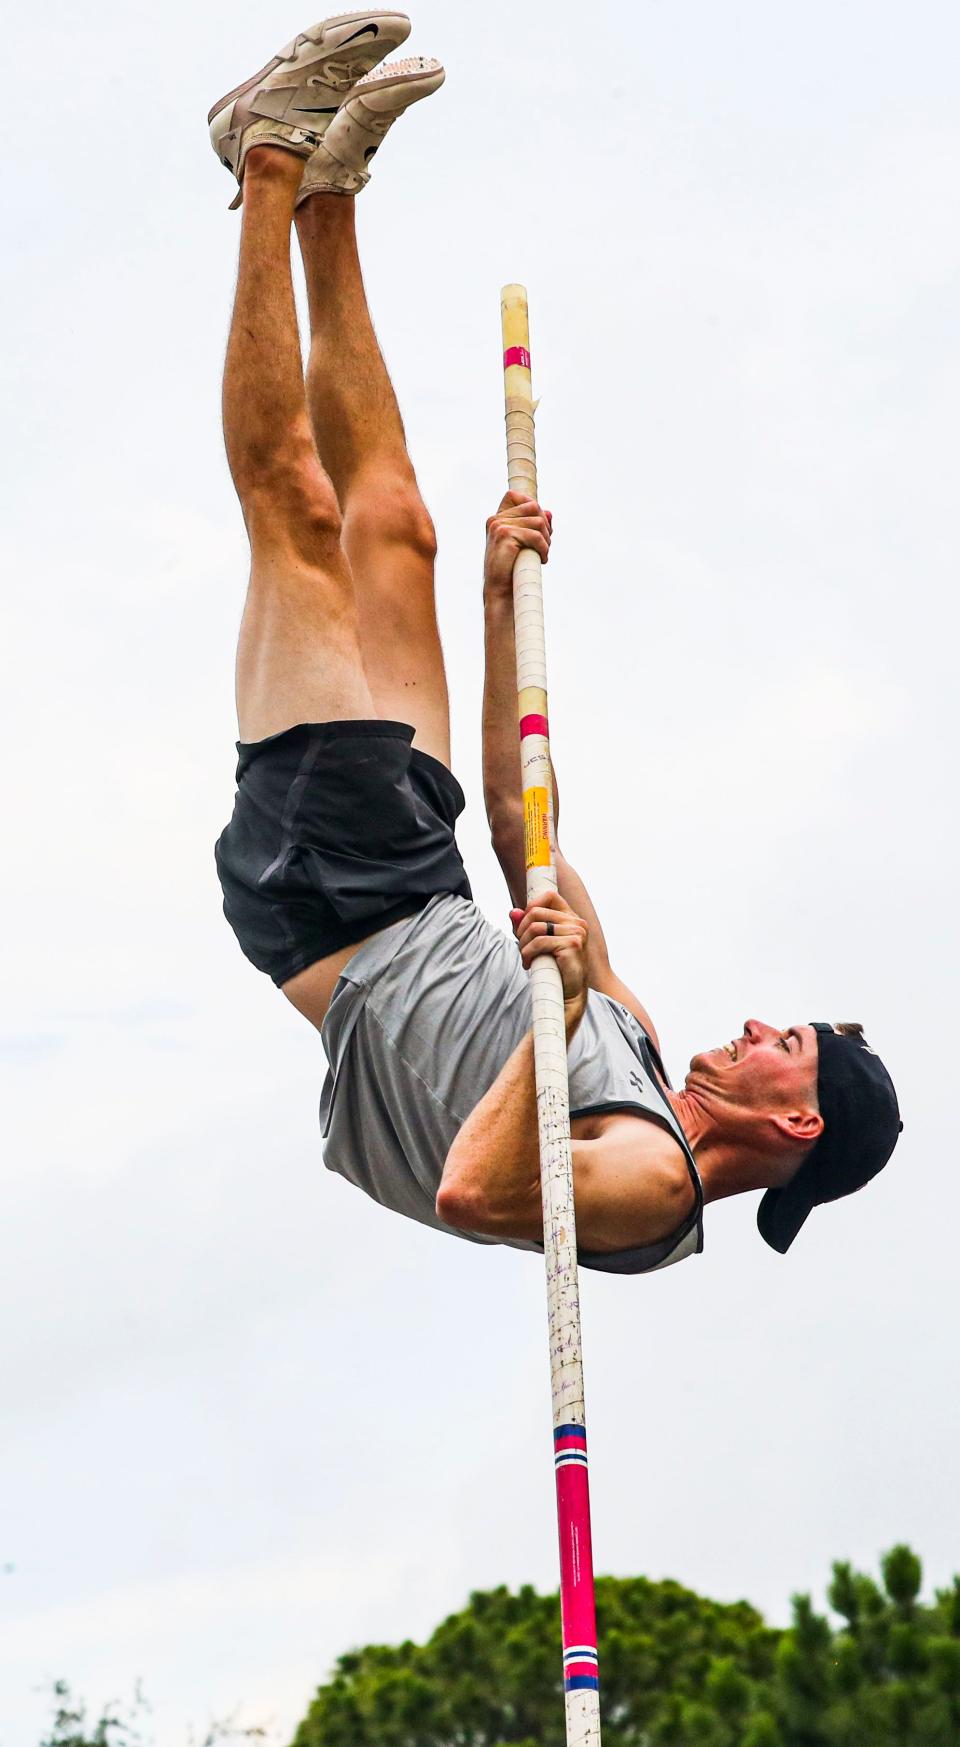 "Pole Vault in the Plaza" competition was held at Mercato in Naples, FL, Saturday, June 25, 2022. A mix of beginners and amateurs competed early in the day. It then progressed throughout the day with the highest level of both female and male pole vaulters competing. 